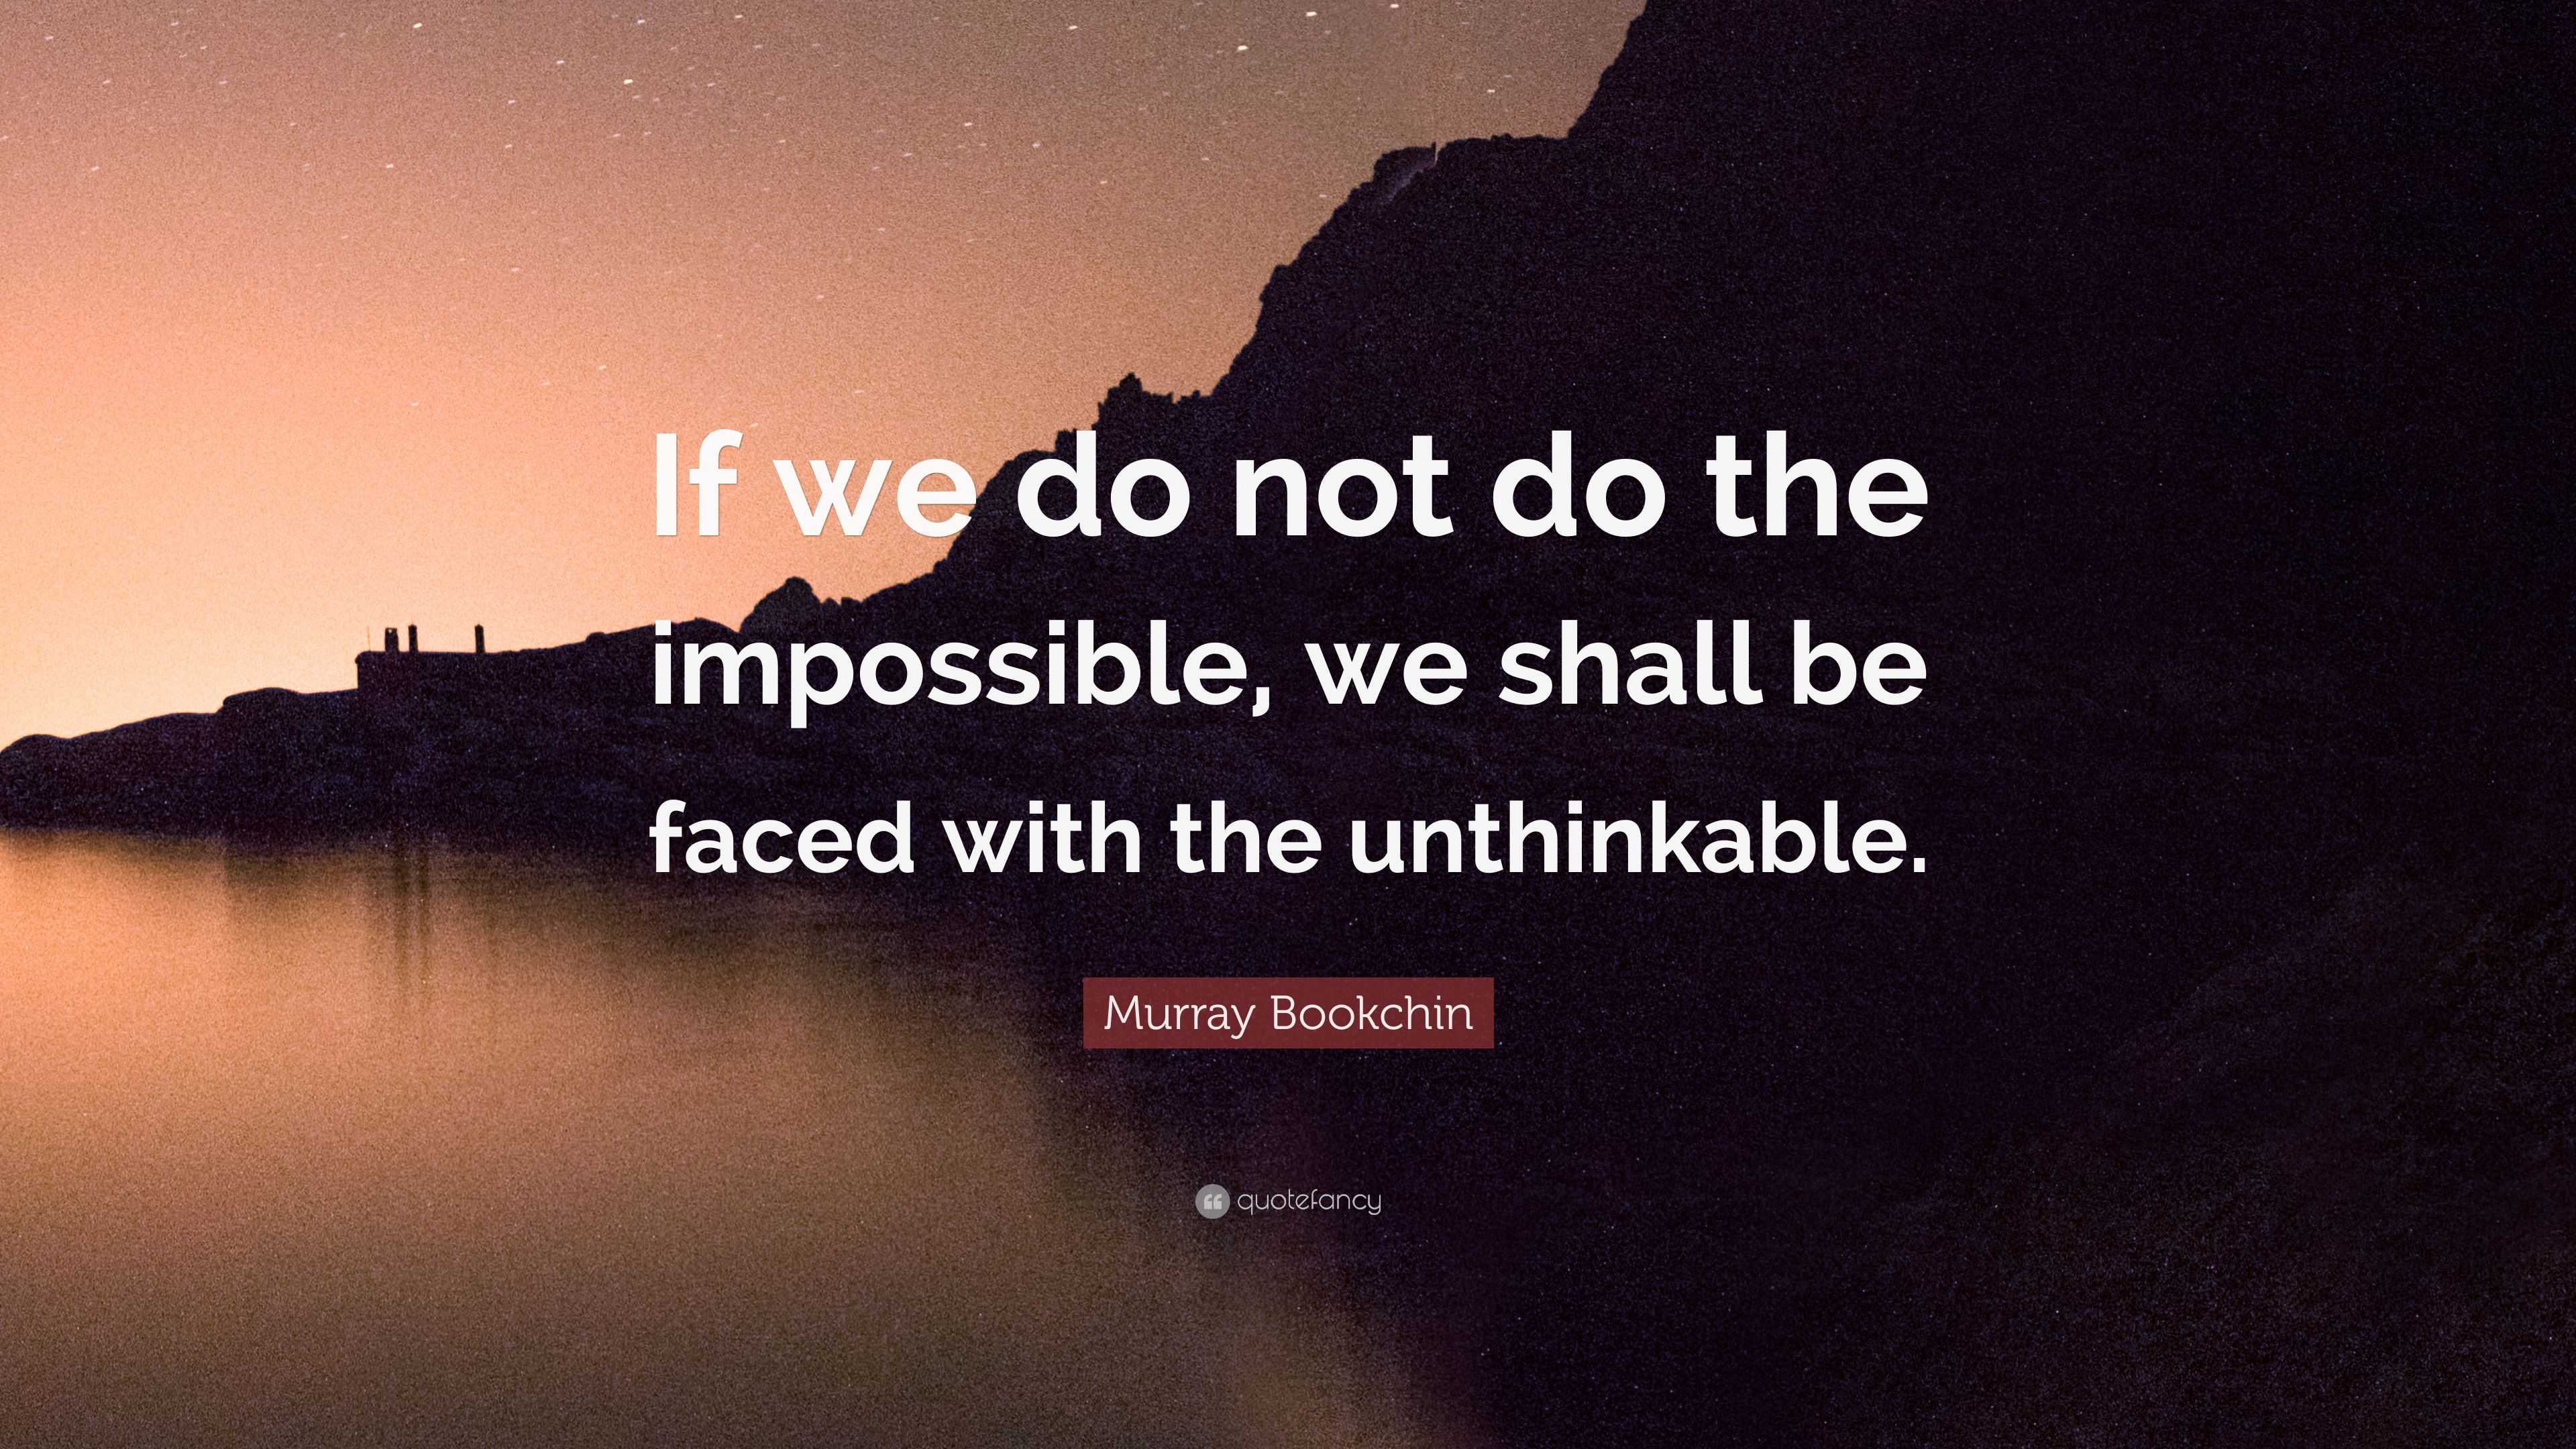 Murray Bookchin Quote: “If we do not do the impossible, we shall be ...